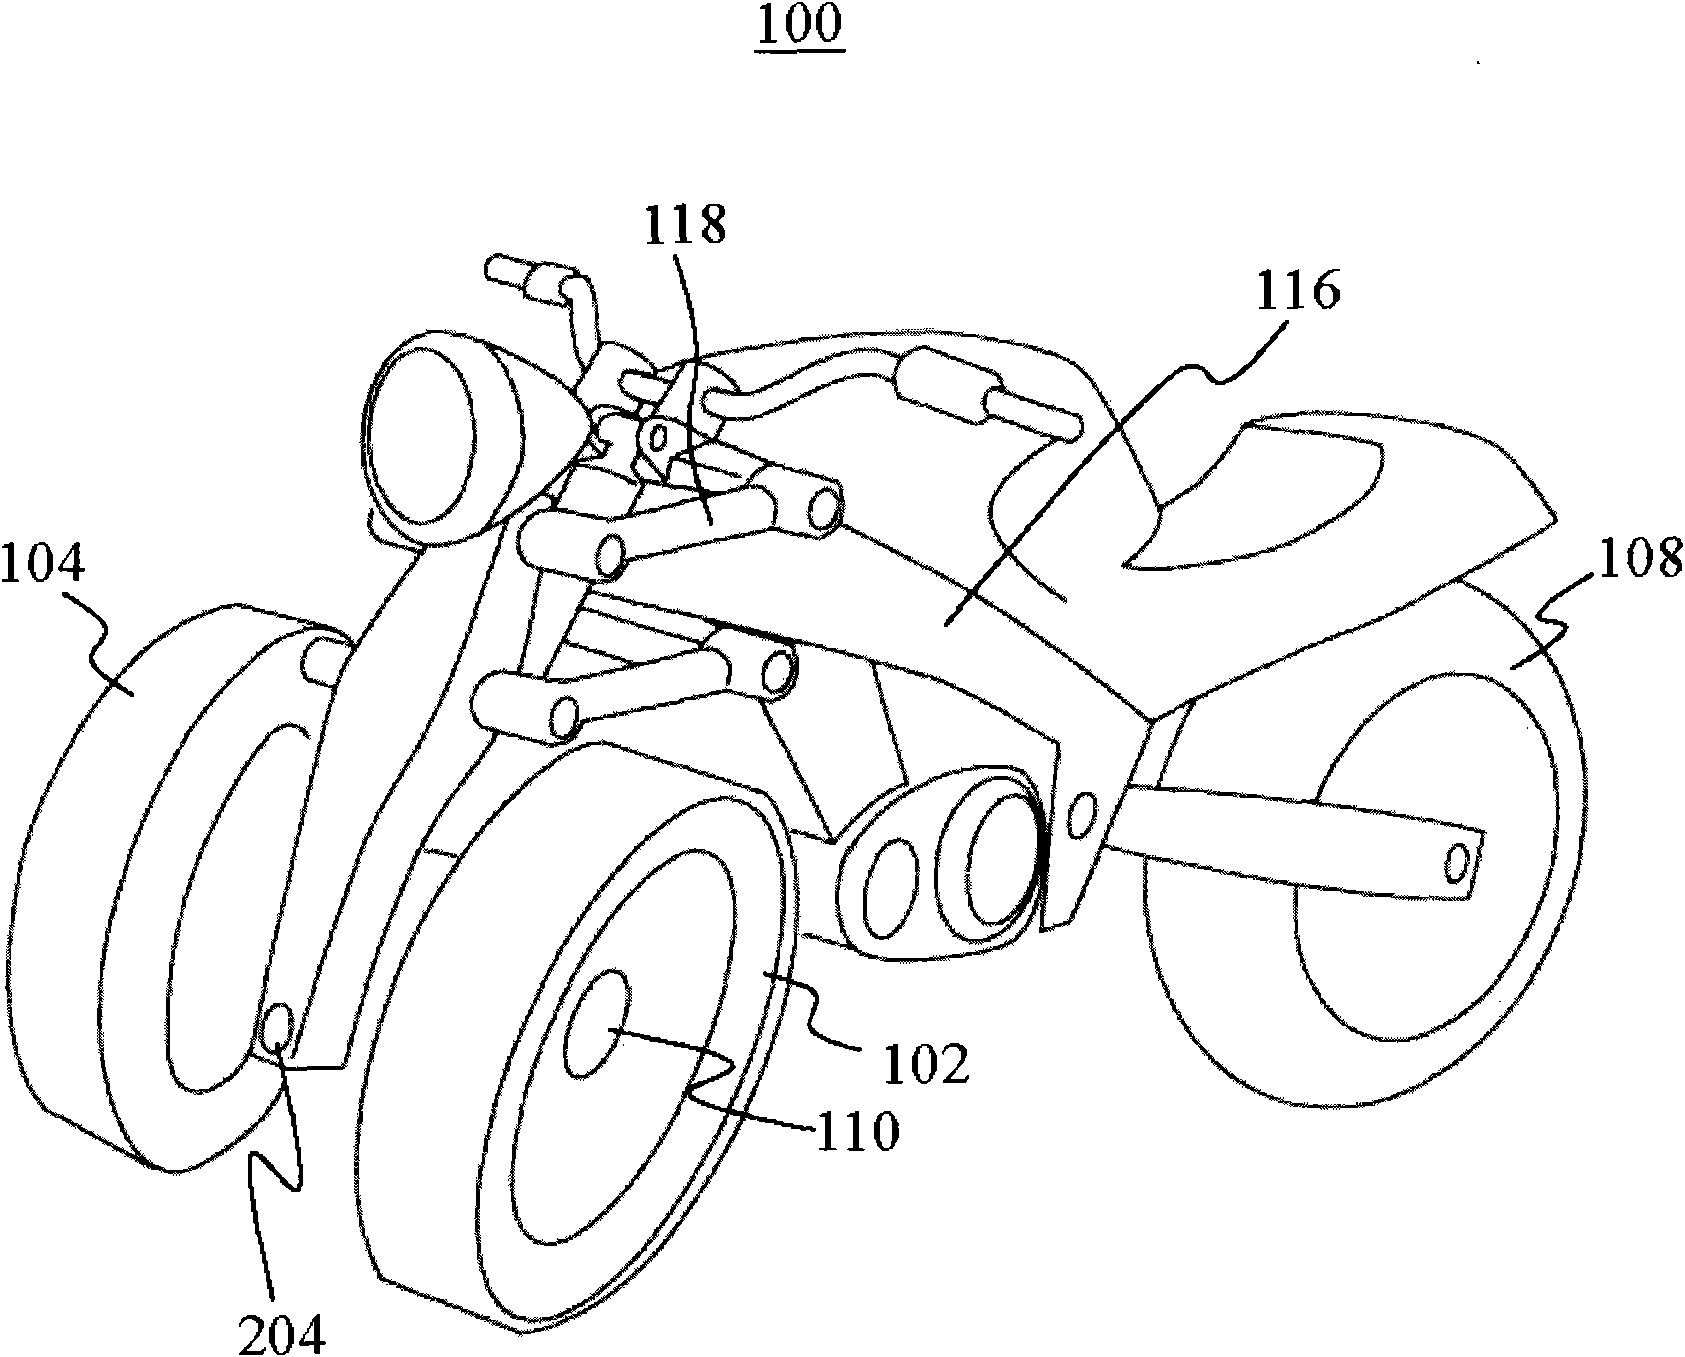 Front wheel tilt-preventing front suspension and steering system for bicycles and motorcycles